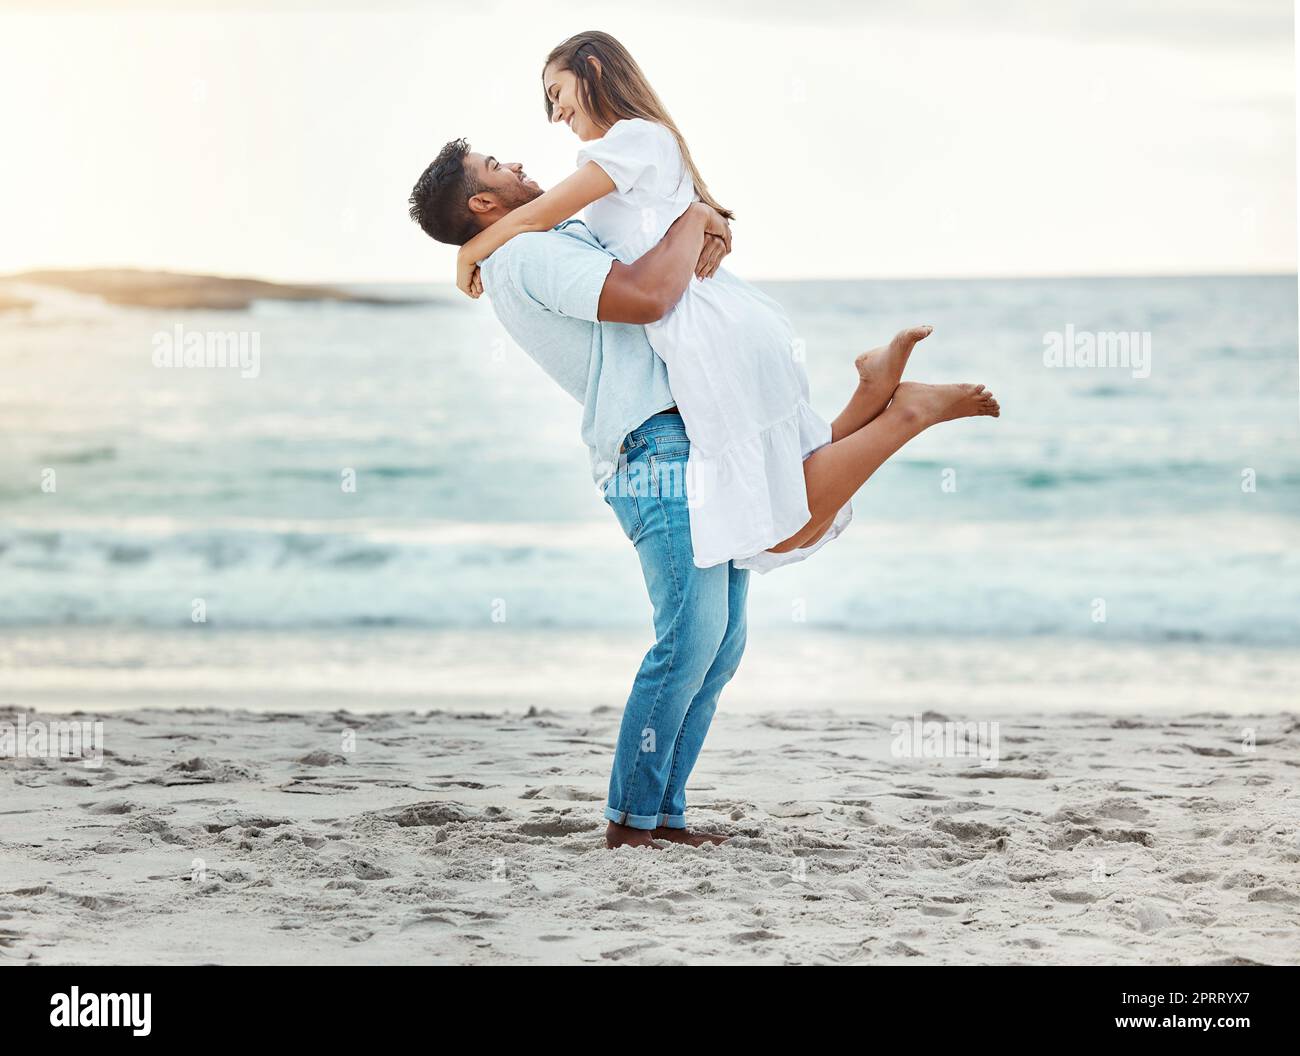 Man at beach lift woman with love, smile with sun setting over the horizon or background. Young couple travel to ocean on vacation, happy together with sunset over sea or waves in nature backdrop. Stock Photo